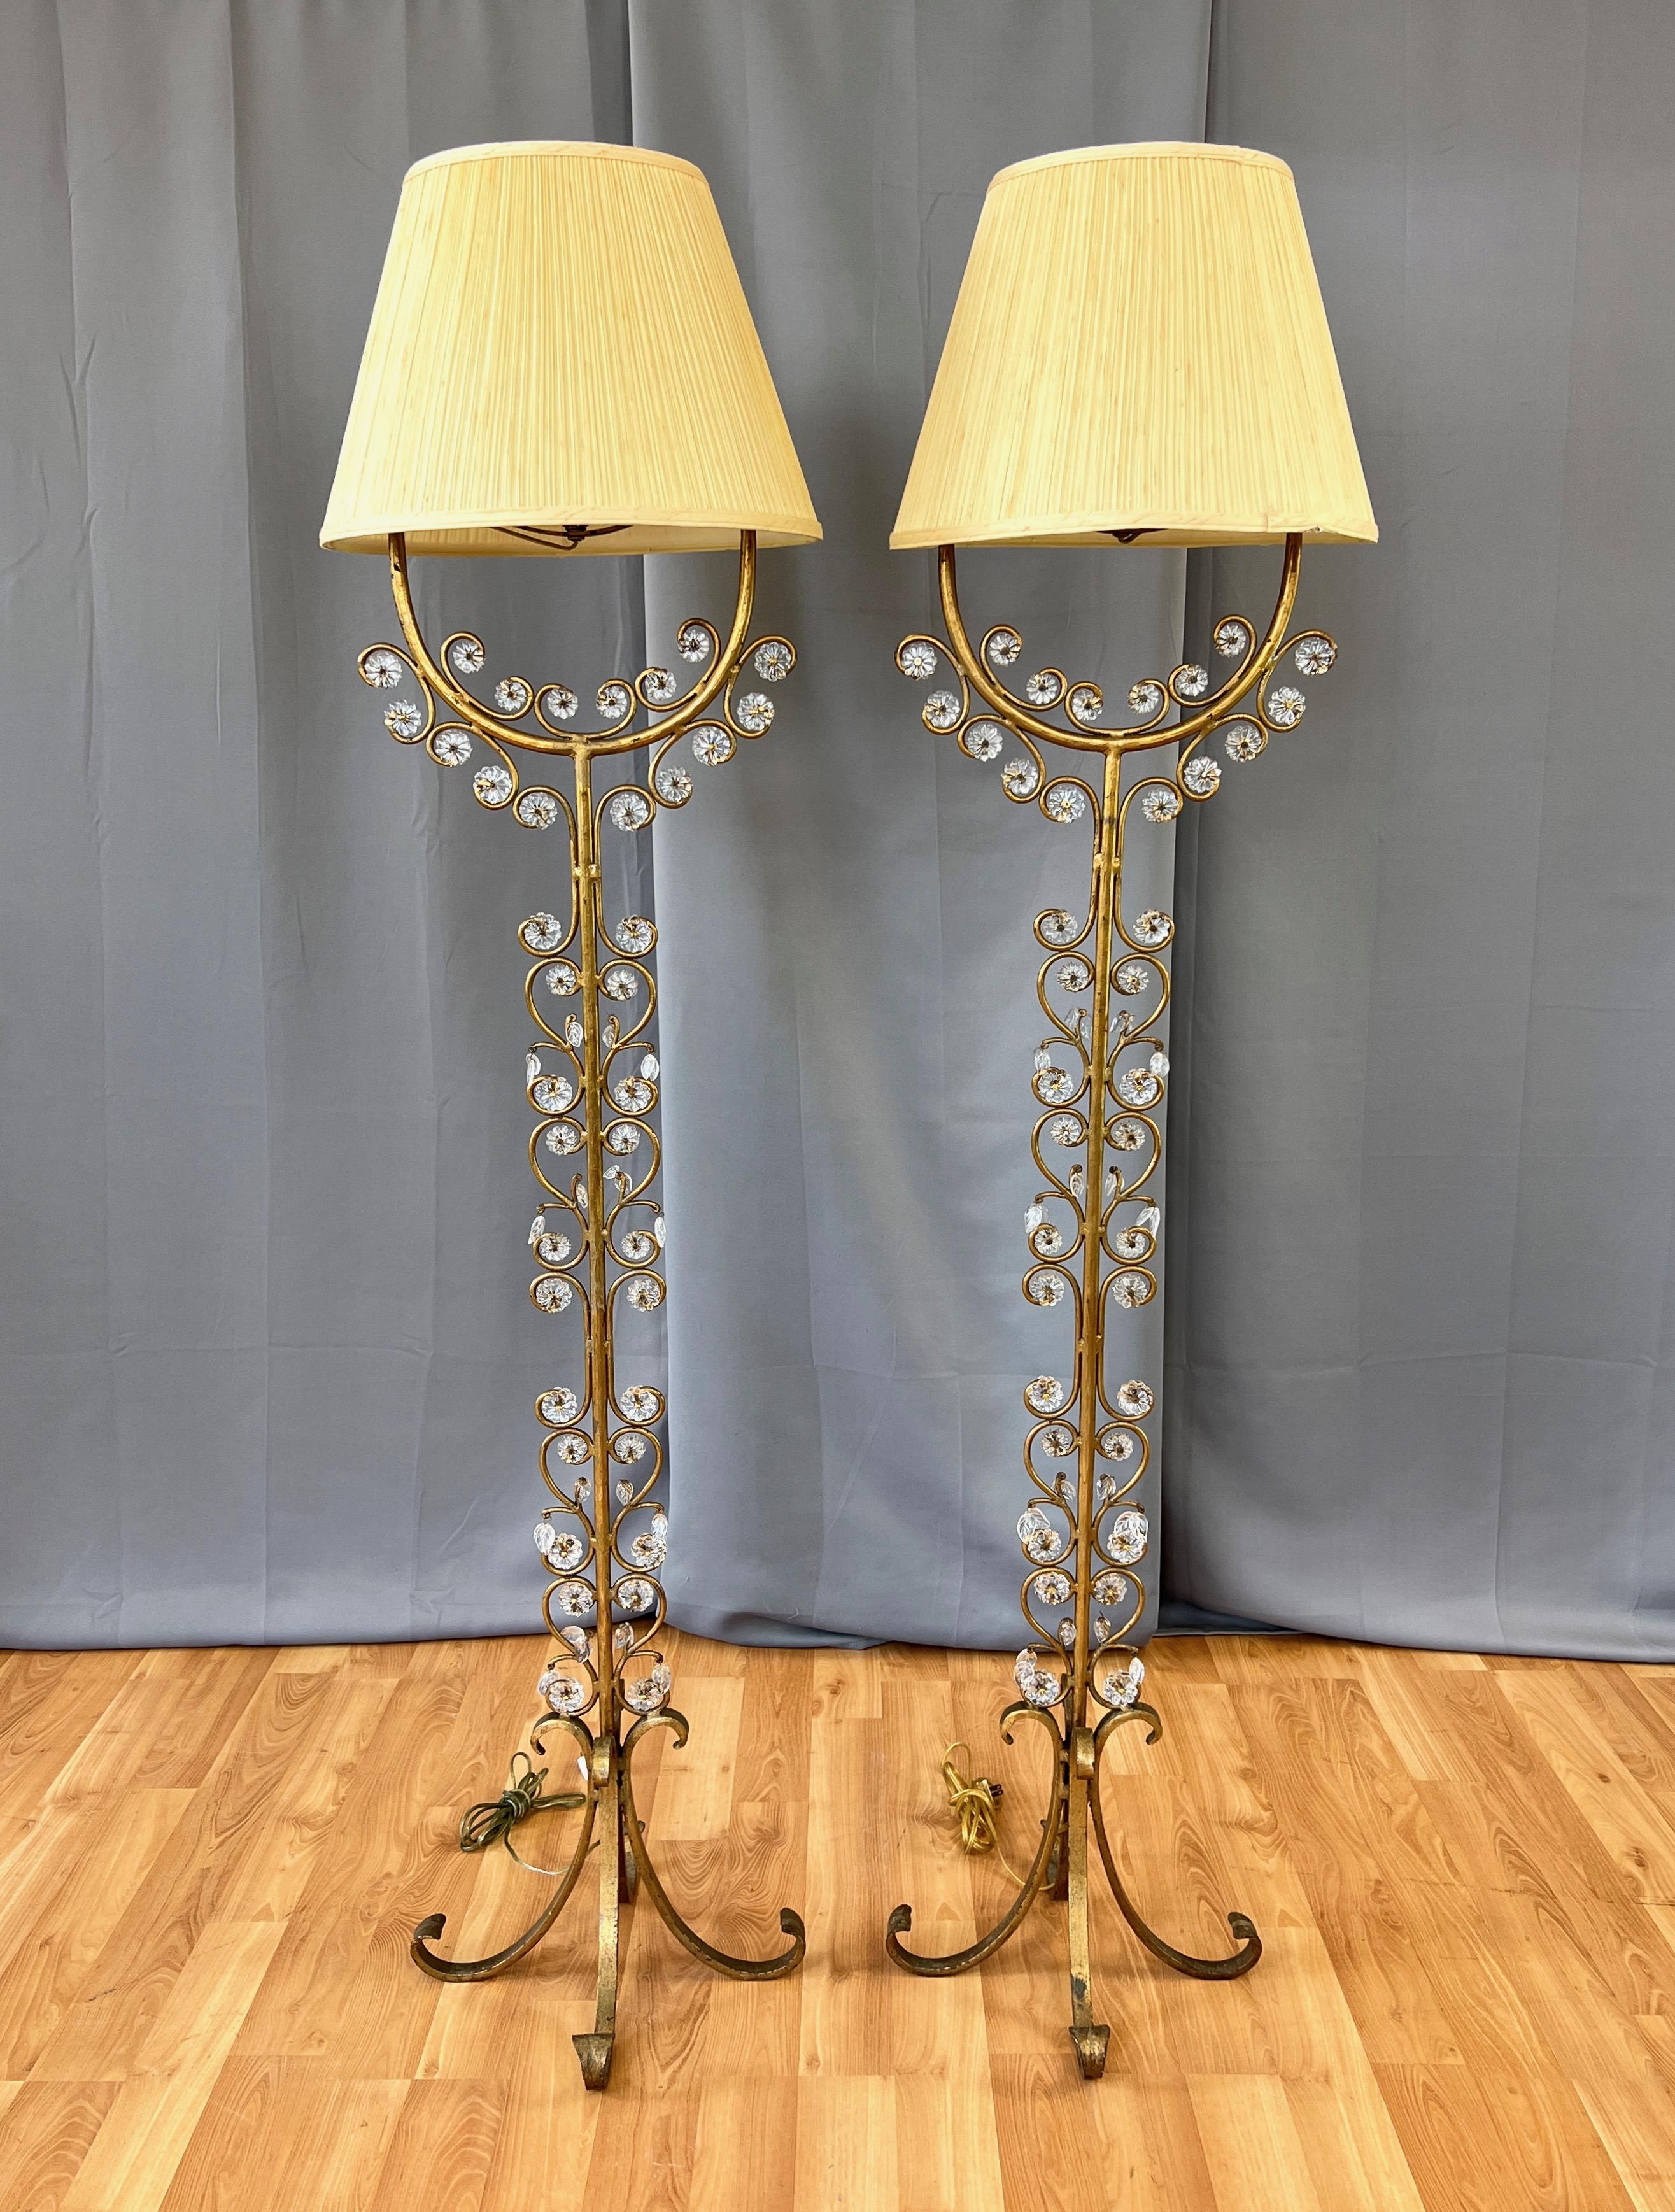 An enchanting pair of tall 1950s Italian gilt wrought iron floor lamps with glass floret & leaf adornments. 

Hollywood Regency heavy wrought iron form with gilt-style finish features elegant scroll work from top to bottom. More than six dozen